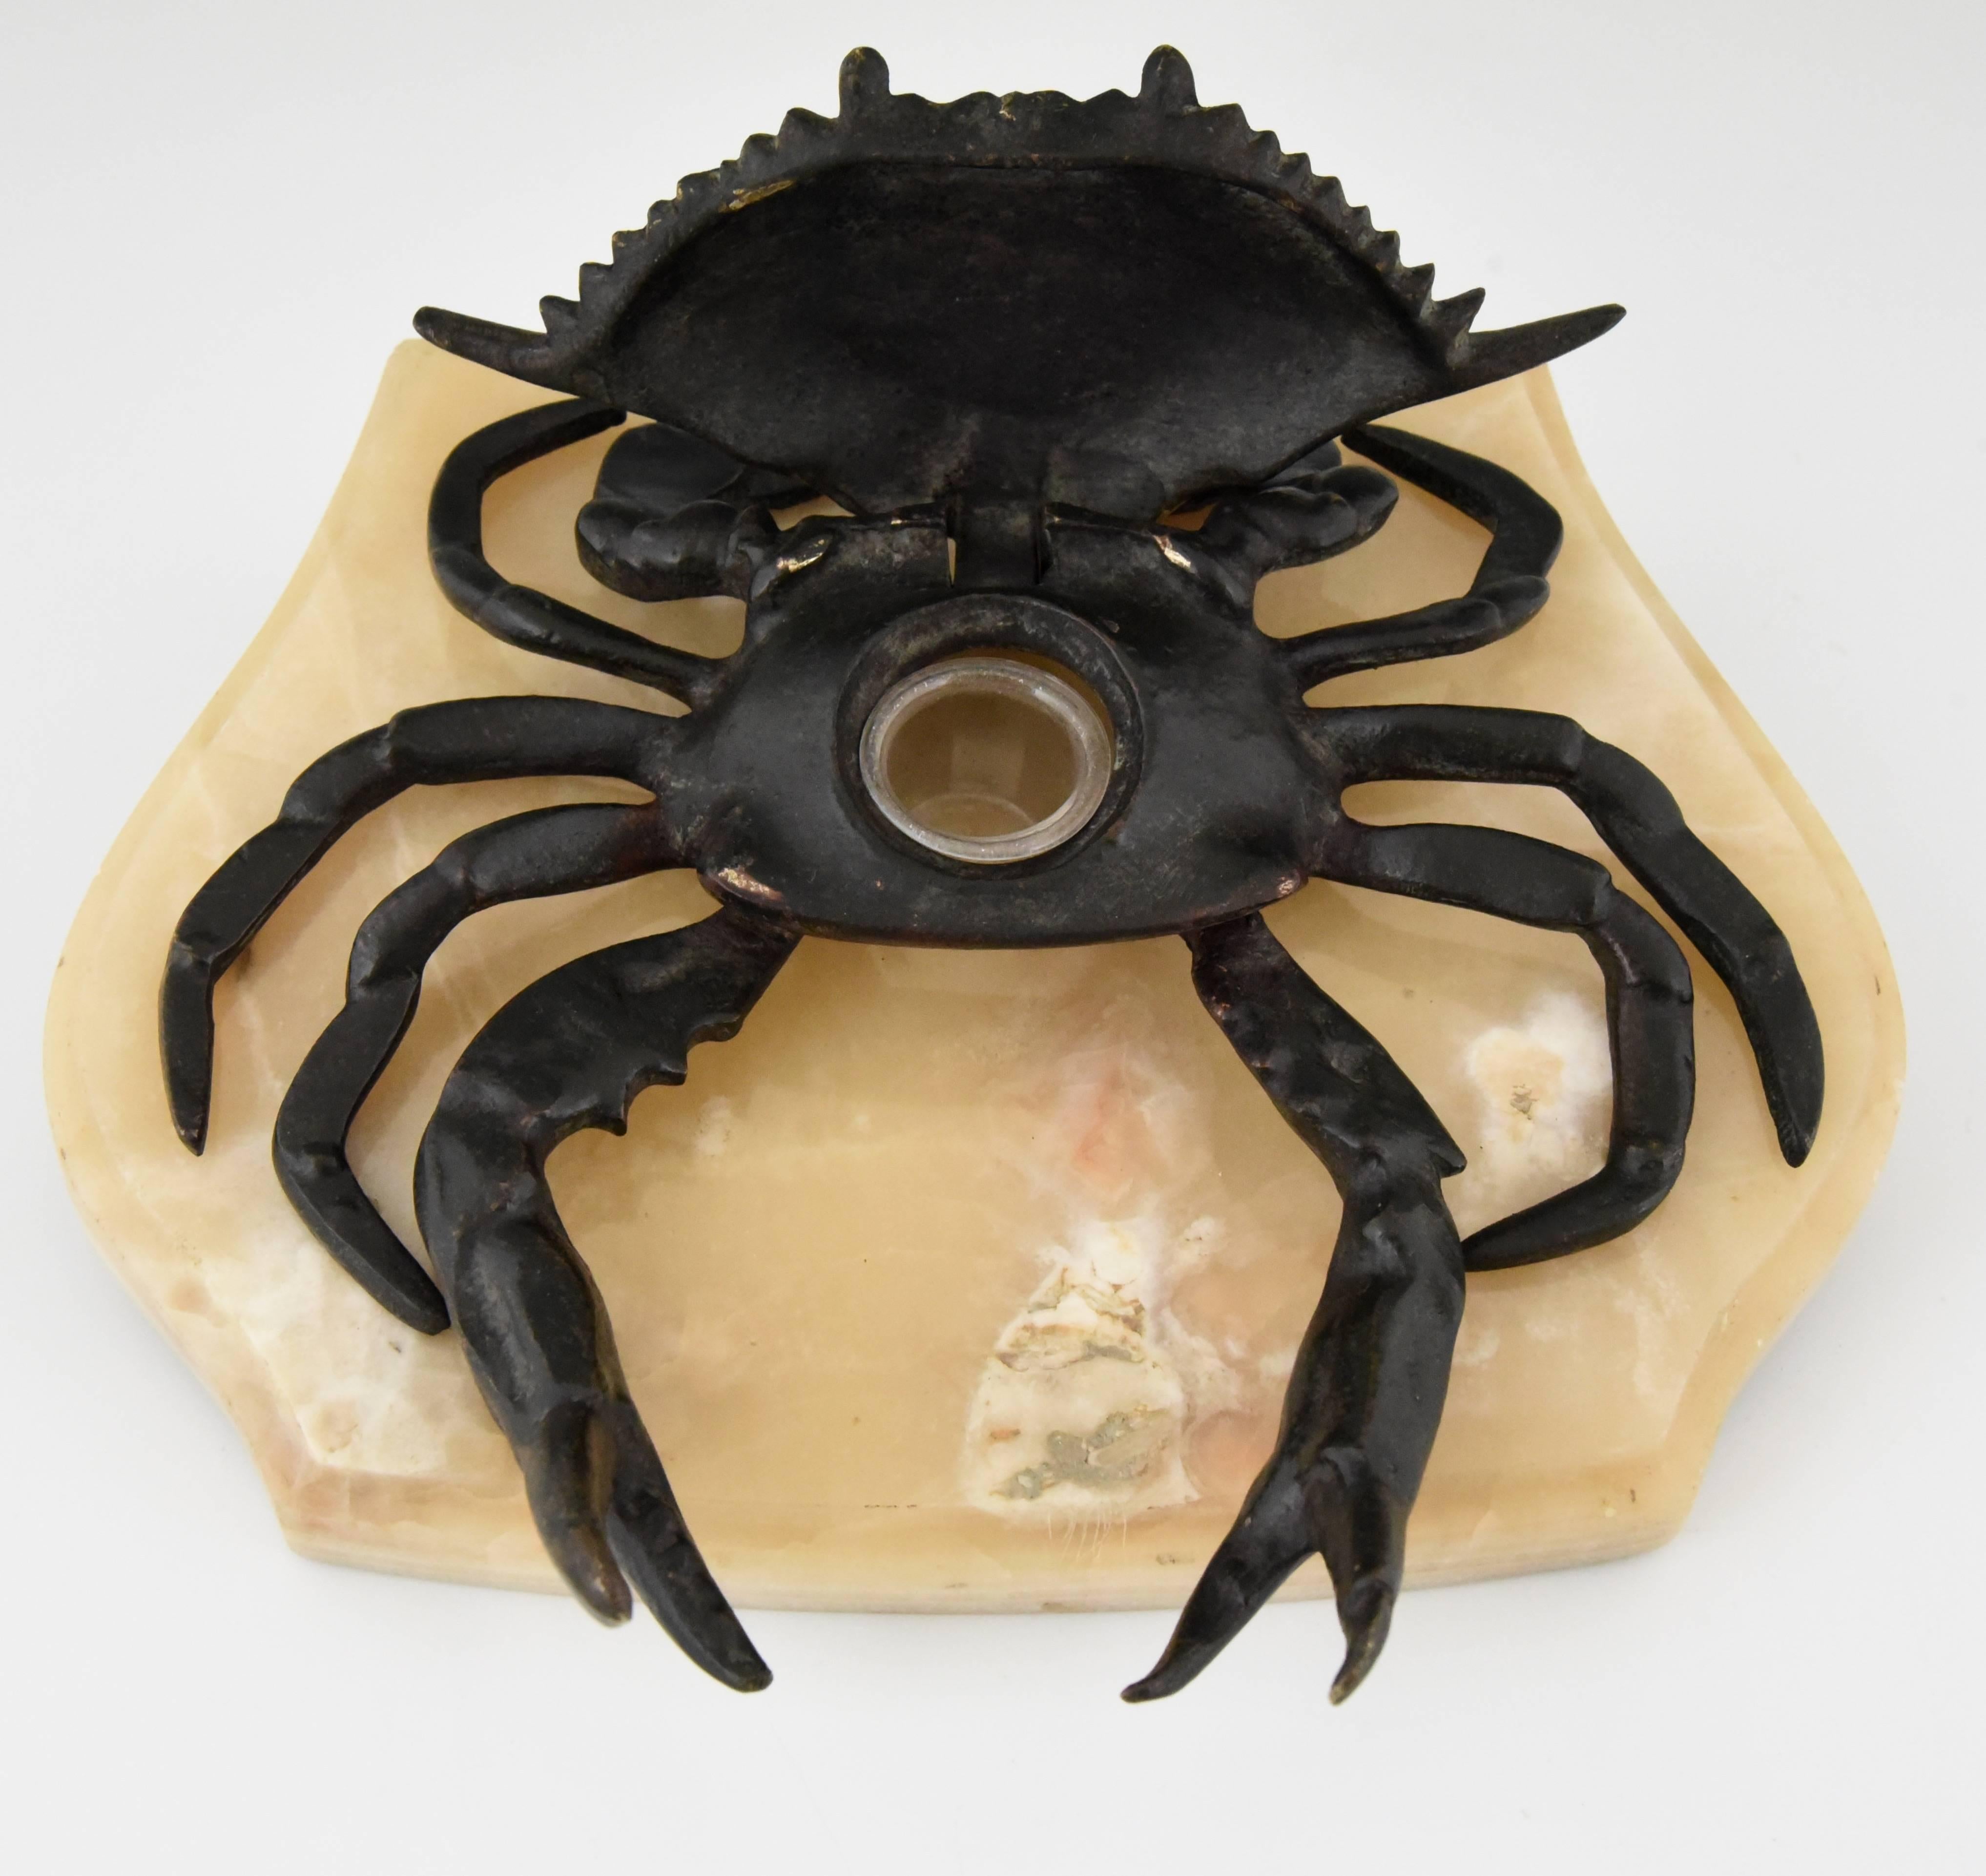 Antique bronze crab inkwell.
The two front claws can be used as a pen holder. 

Date: 1900
Material: Bronze and onyx.
Origin: France
Size: H 5.5 cm x L 21.5 cm. x W 19 cm.  
H 2.2 inch x L 8.5 inch x W 7.5 inch.
Condition: Good condition.